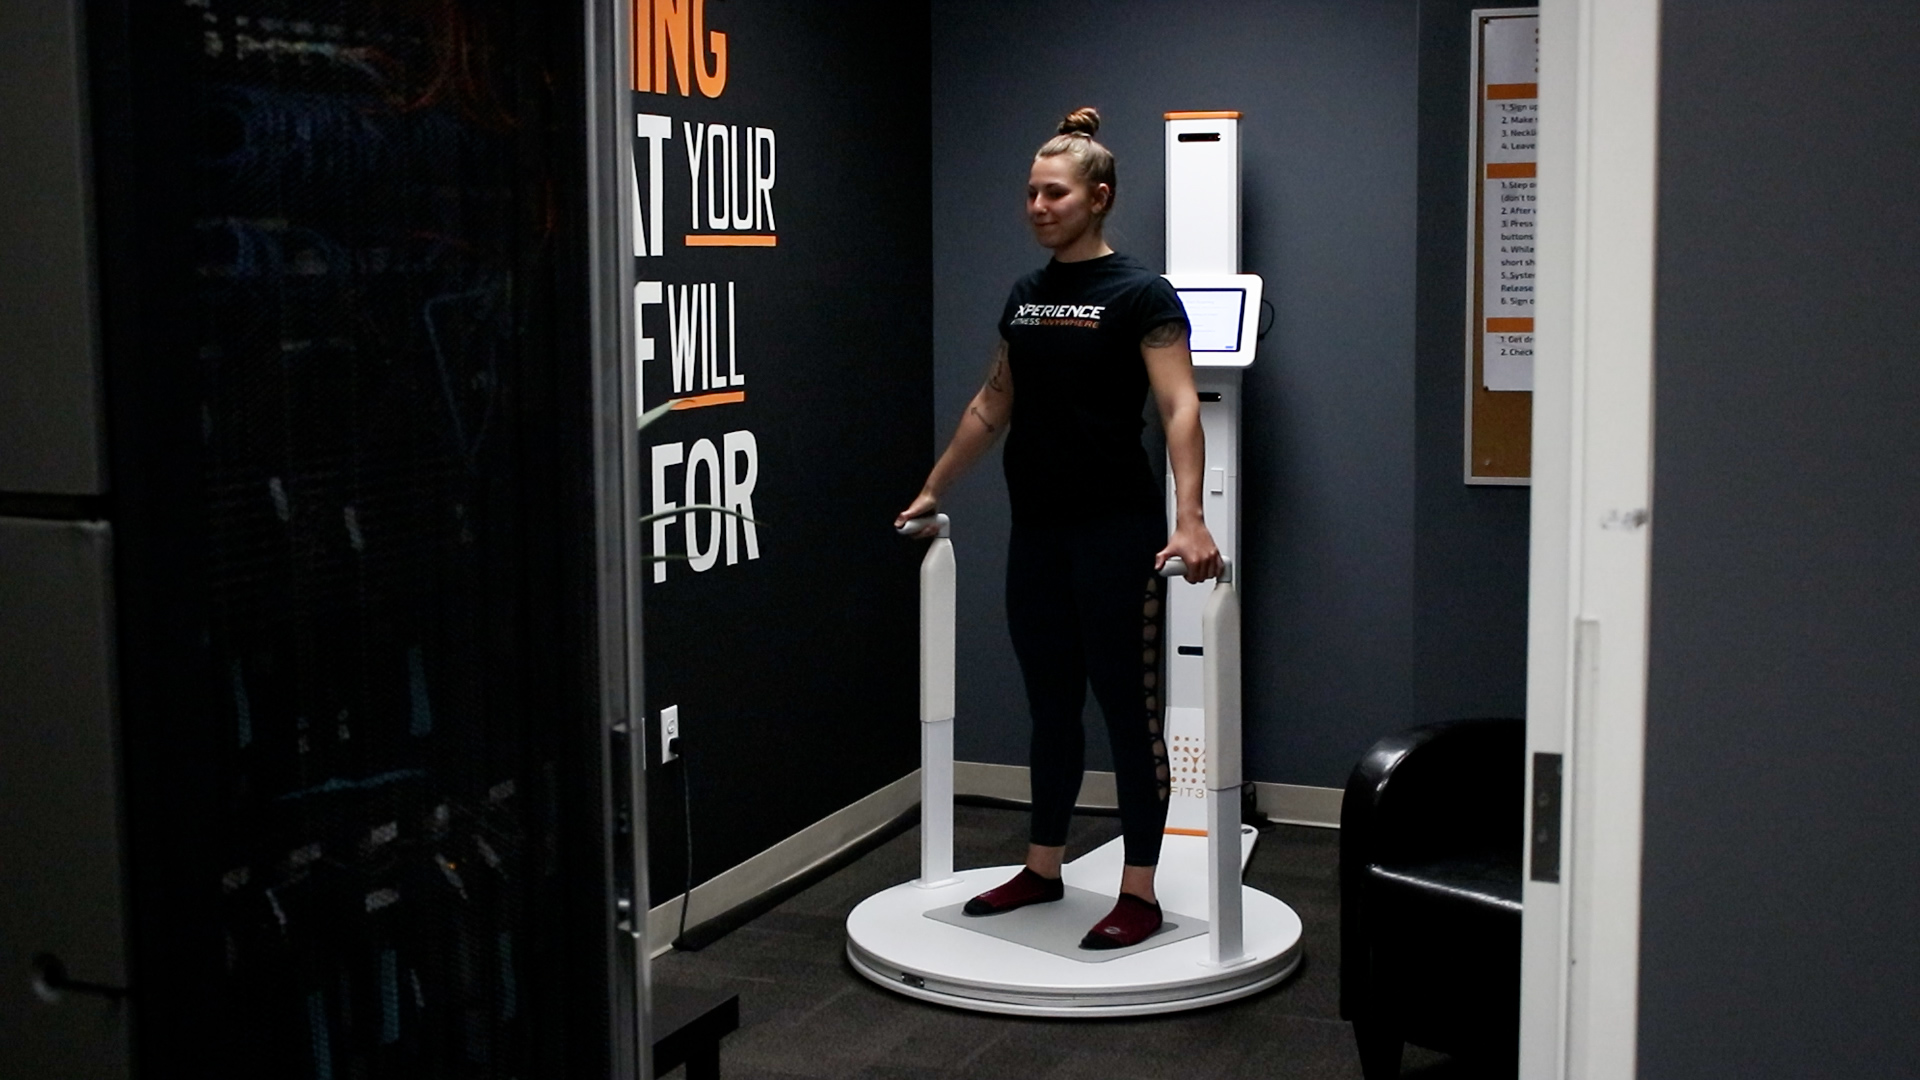 7 reasons to get a Bodyscan - Review of Bodyscan fitness technology